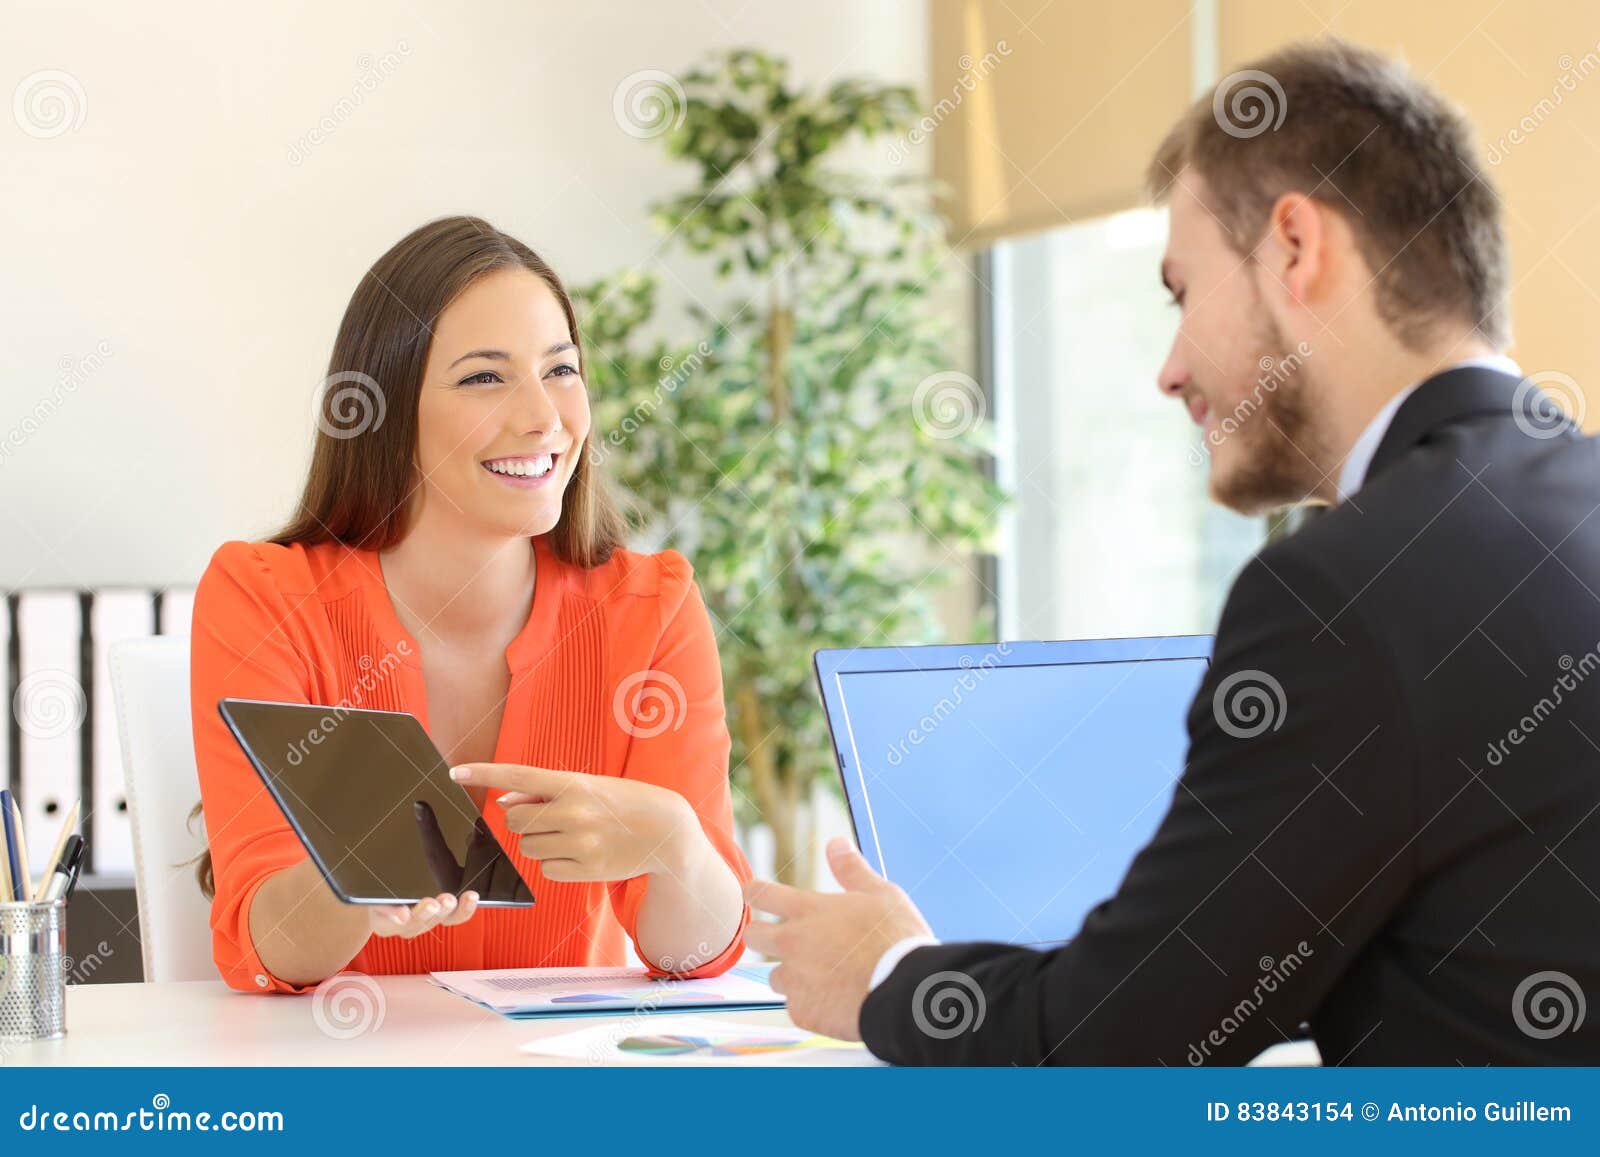 saleswoman trying to sell to a client